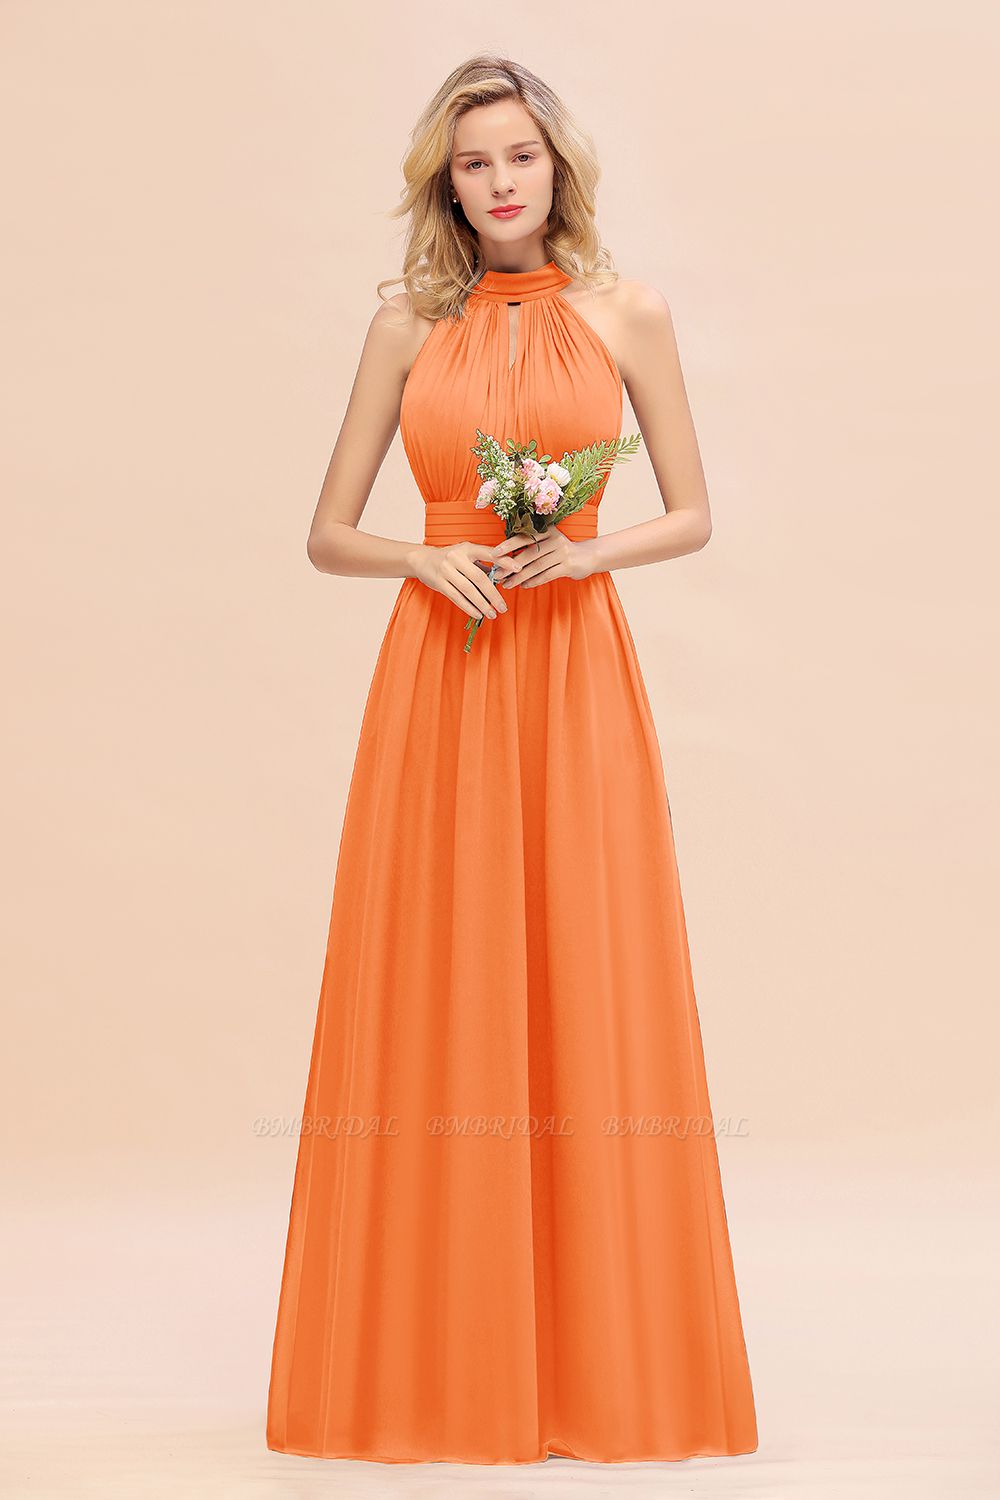 BMbridal Glamorous High-Neck Halter Bridesmaid Affordable Dresses with Ruffle